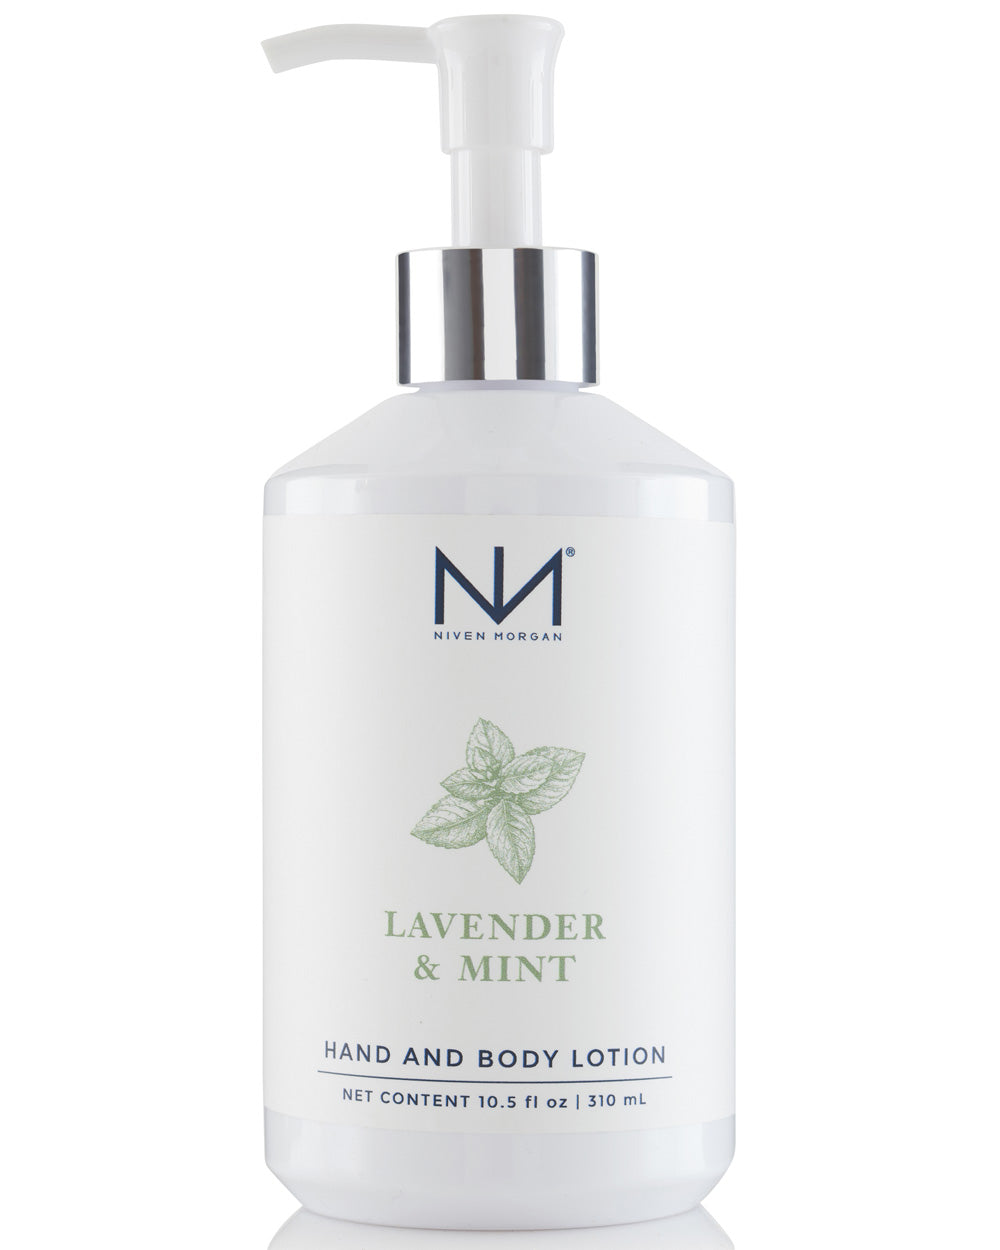 Lavender & Mint Hand and Body Lotion